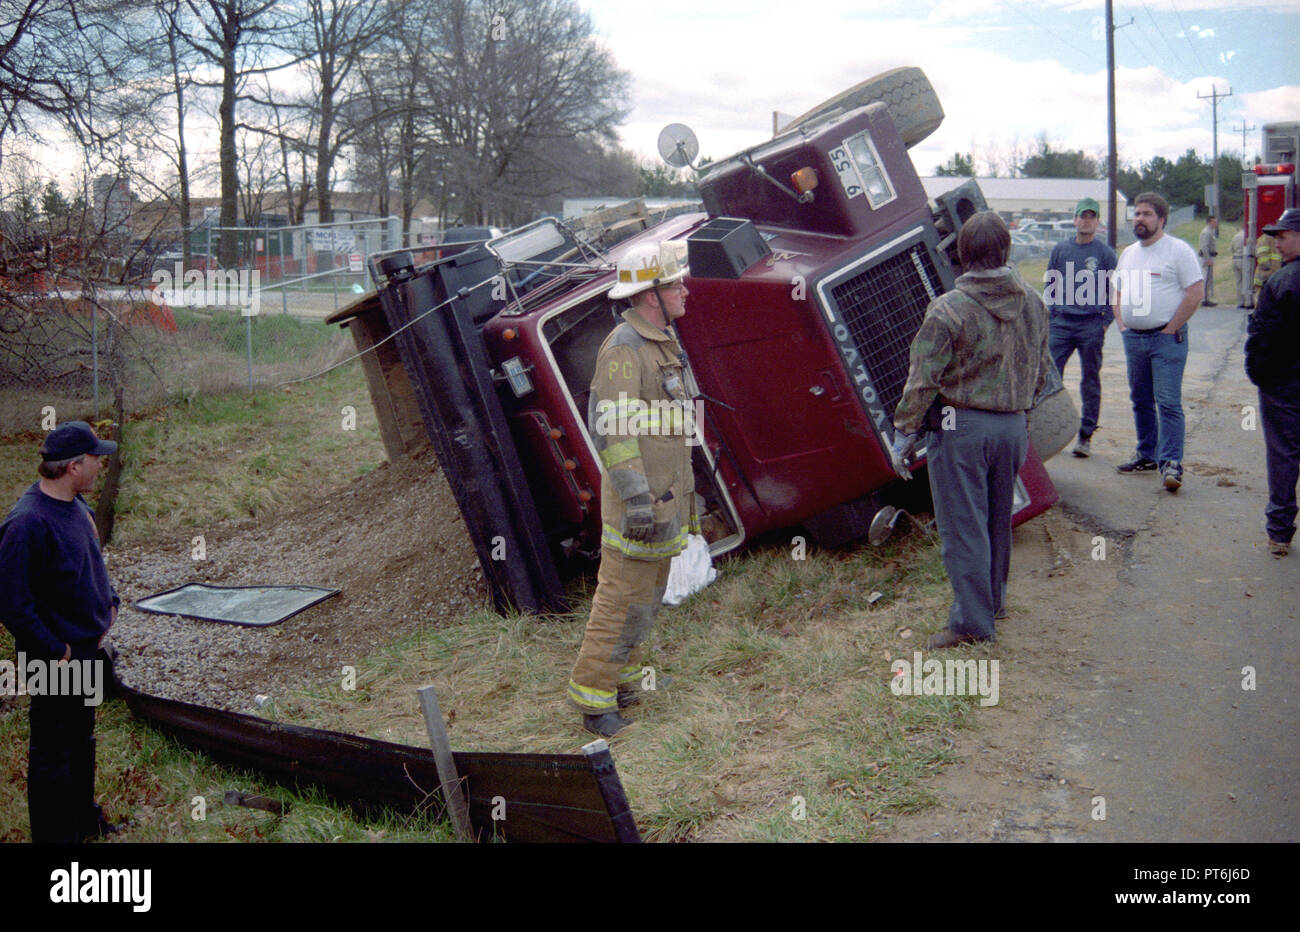 Firefighters examine an overturned tractor trailer in Largo, Maryland Stock Photo